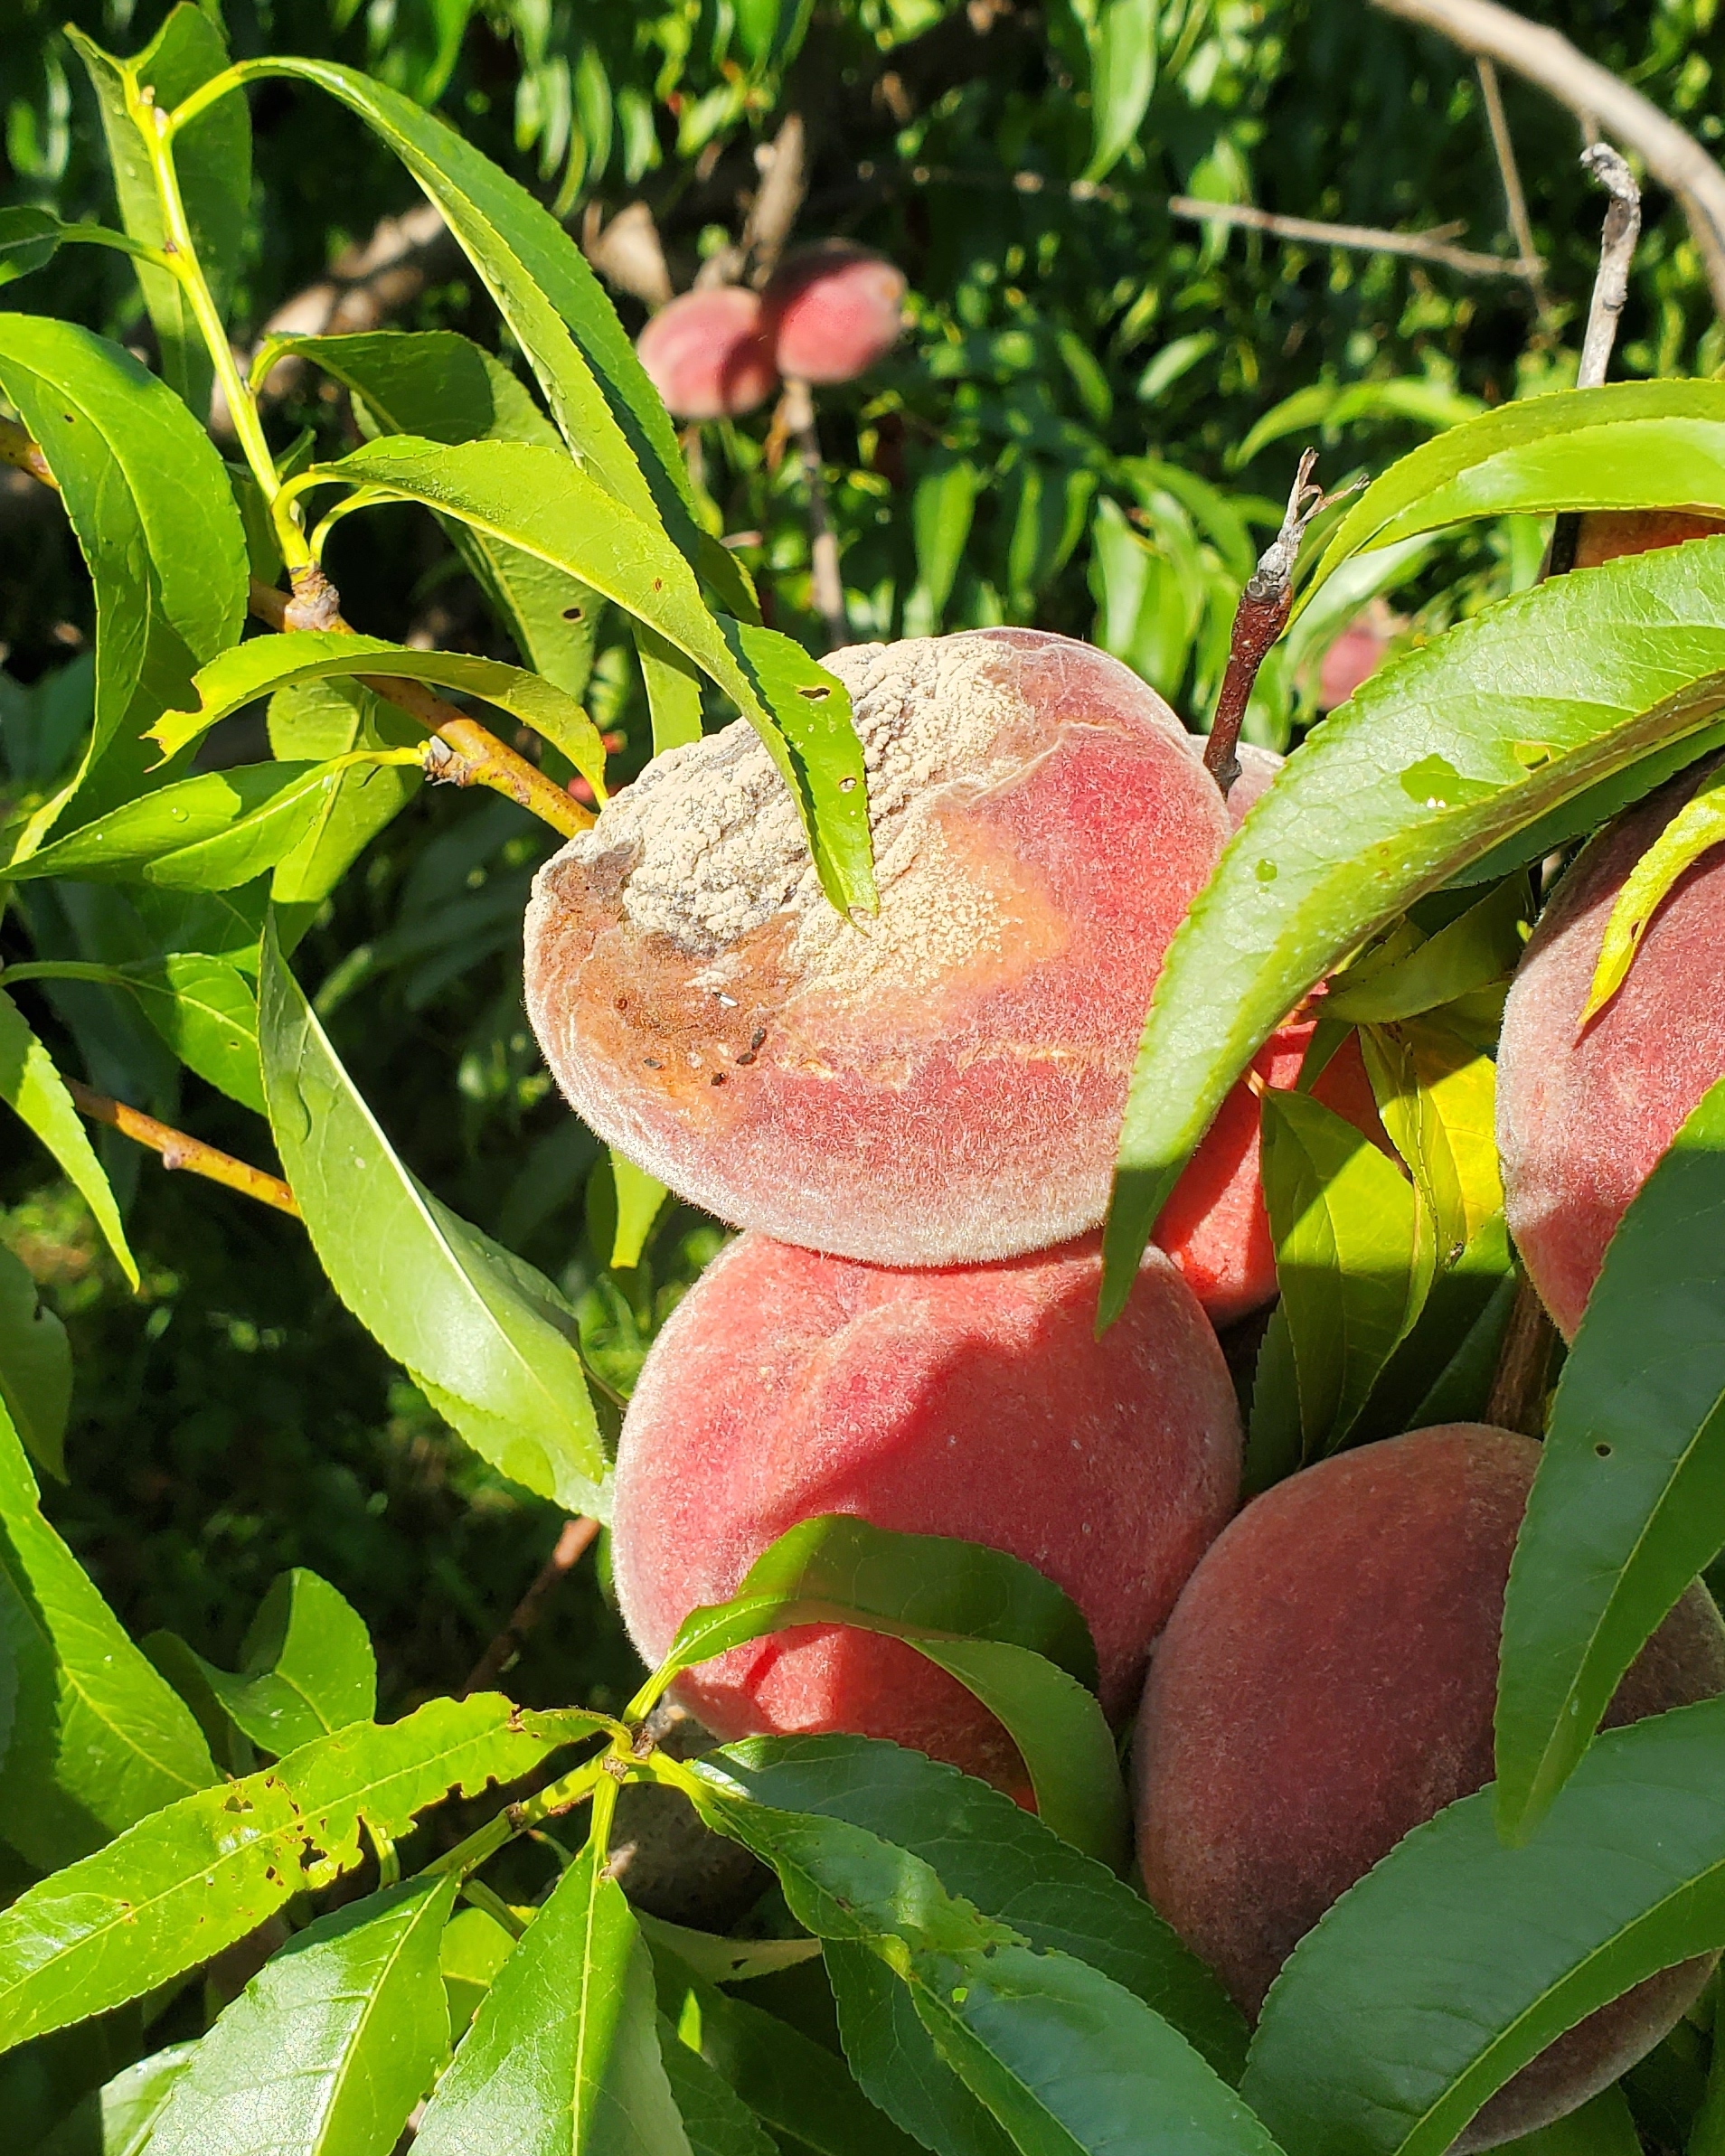 Brown rot on peaches.